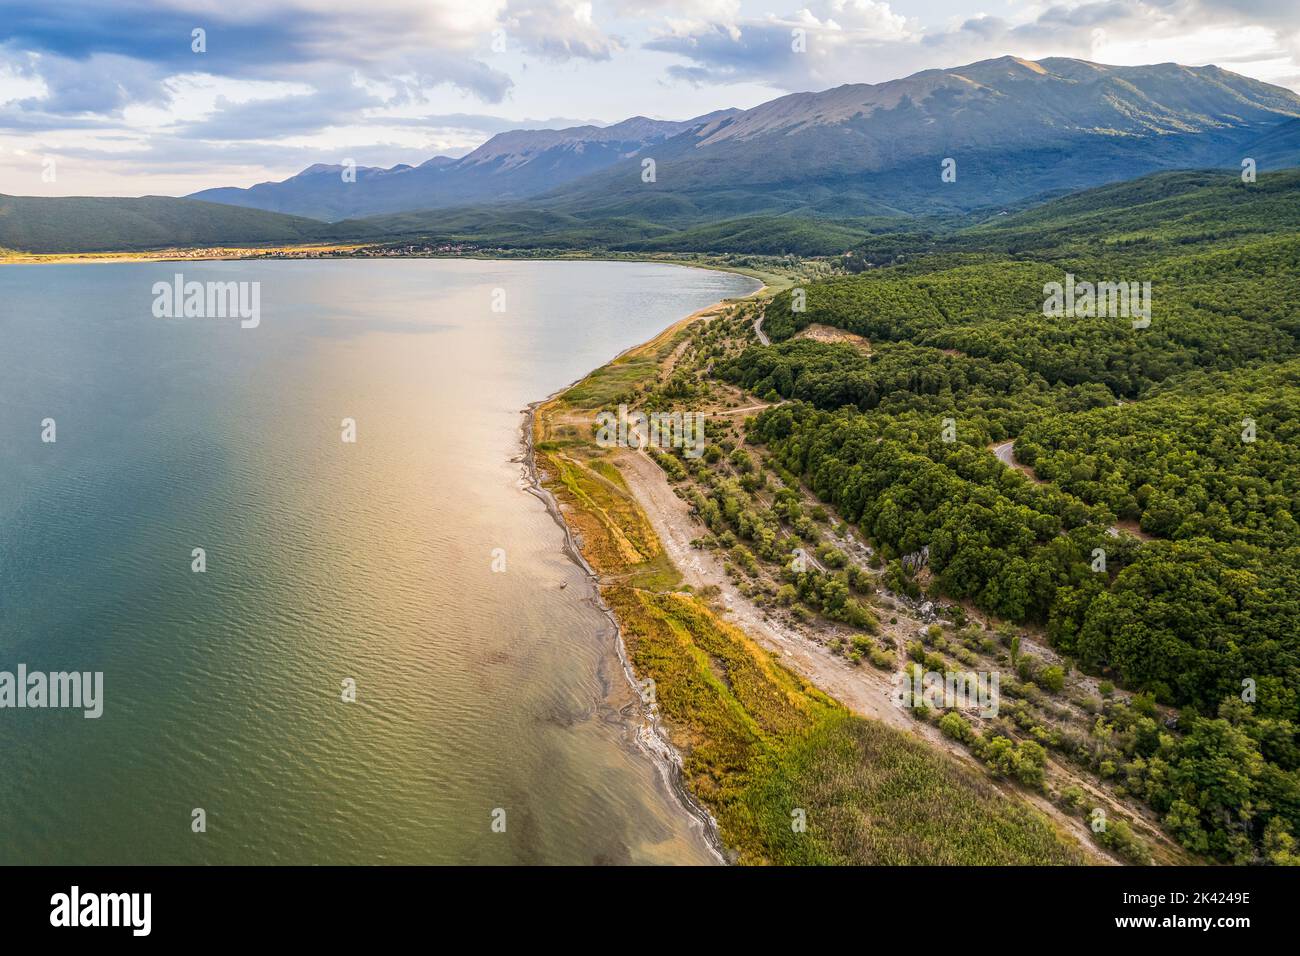 Aerial view of Ohrid-Prespa Transboundary Biosphere Reserve in National Park Galicica in North Macedonia, shore of Prespa lake in sunset Stock Photo